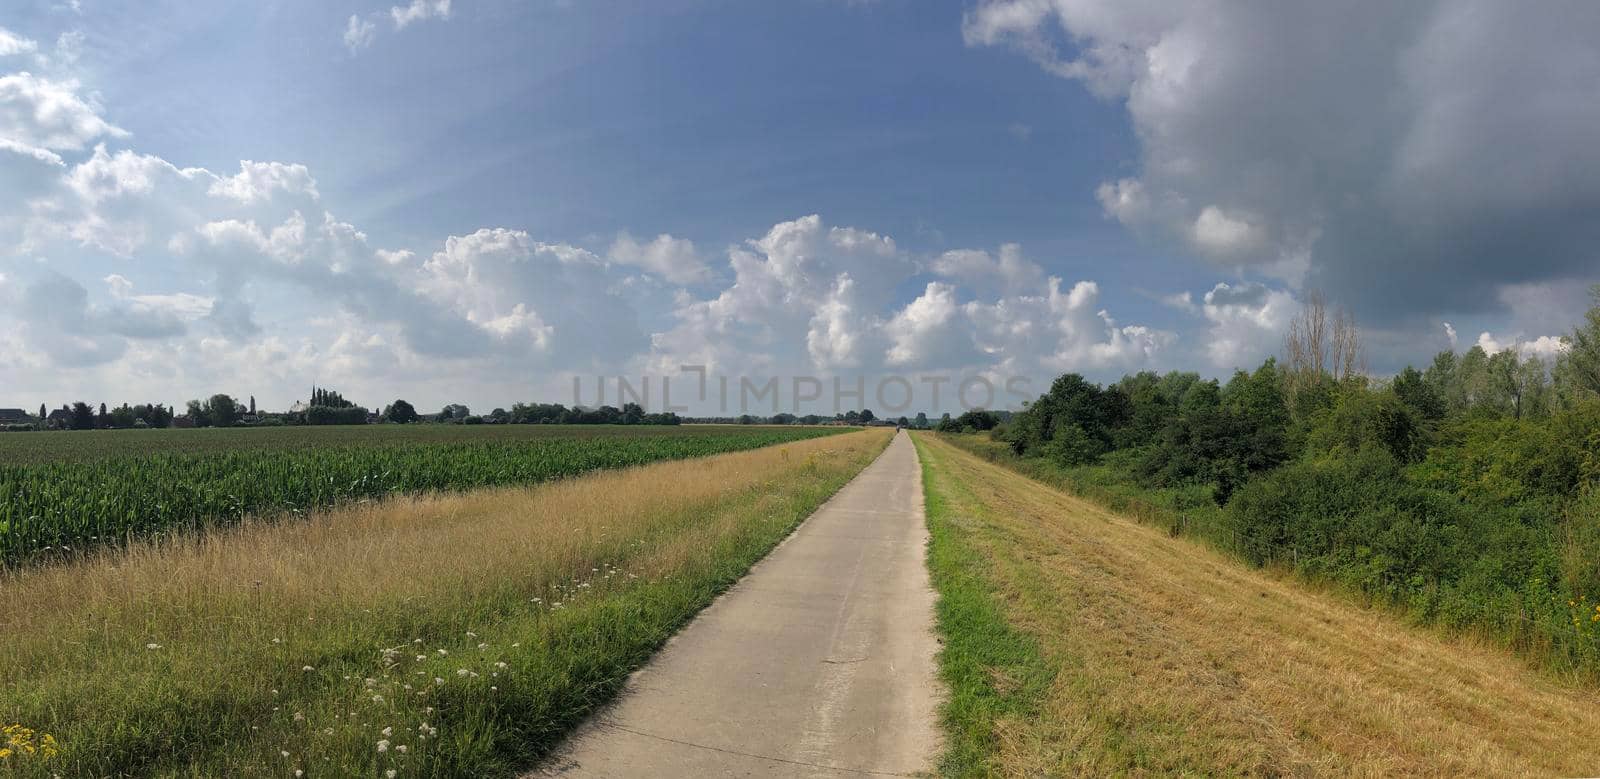 Landscape panoramic from around Olburgen in The Netherlands